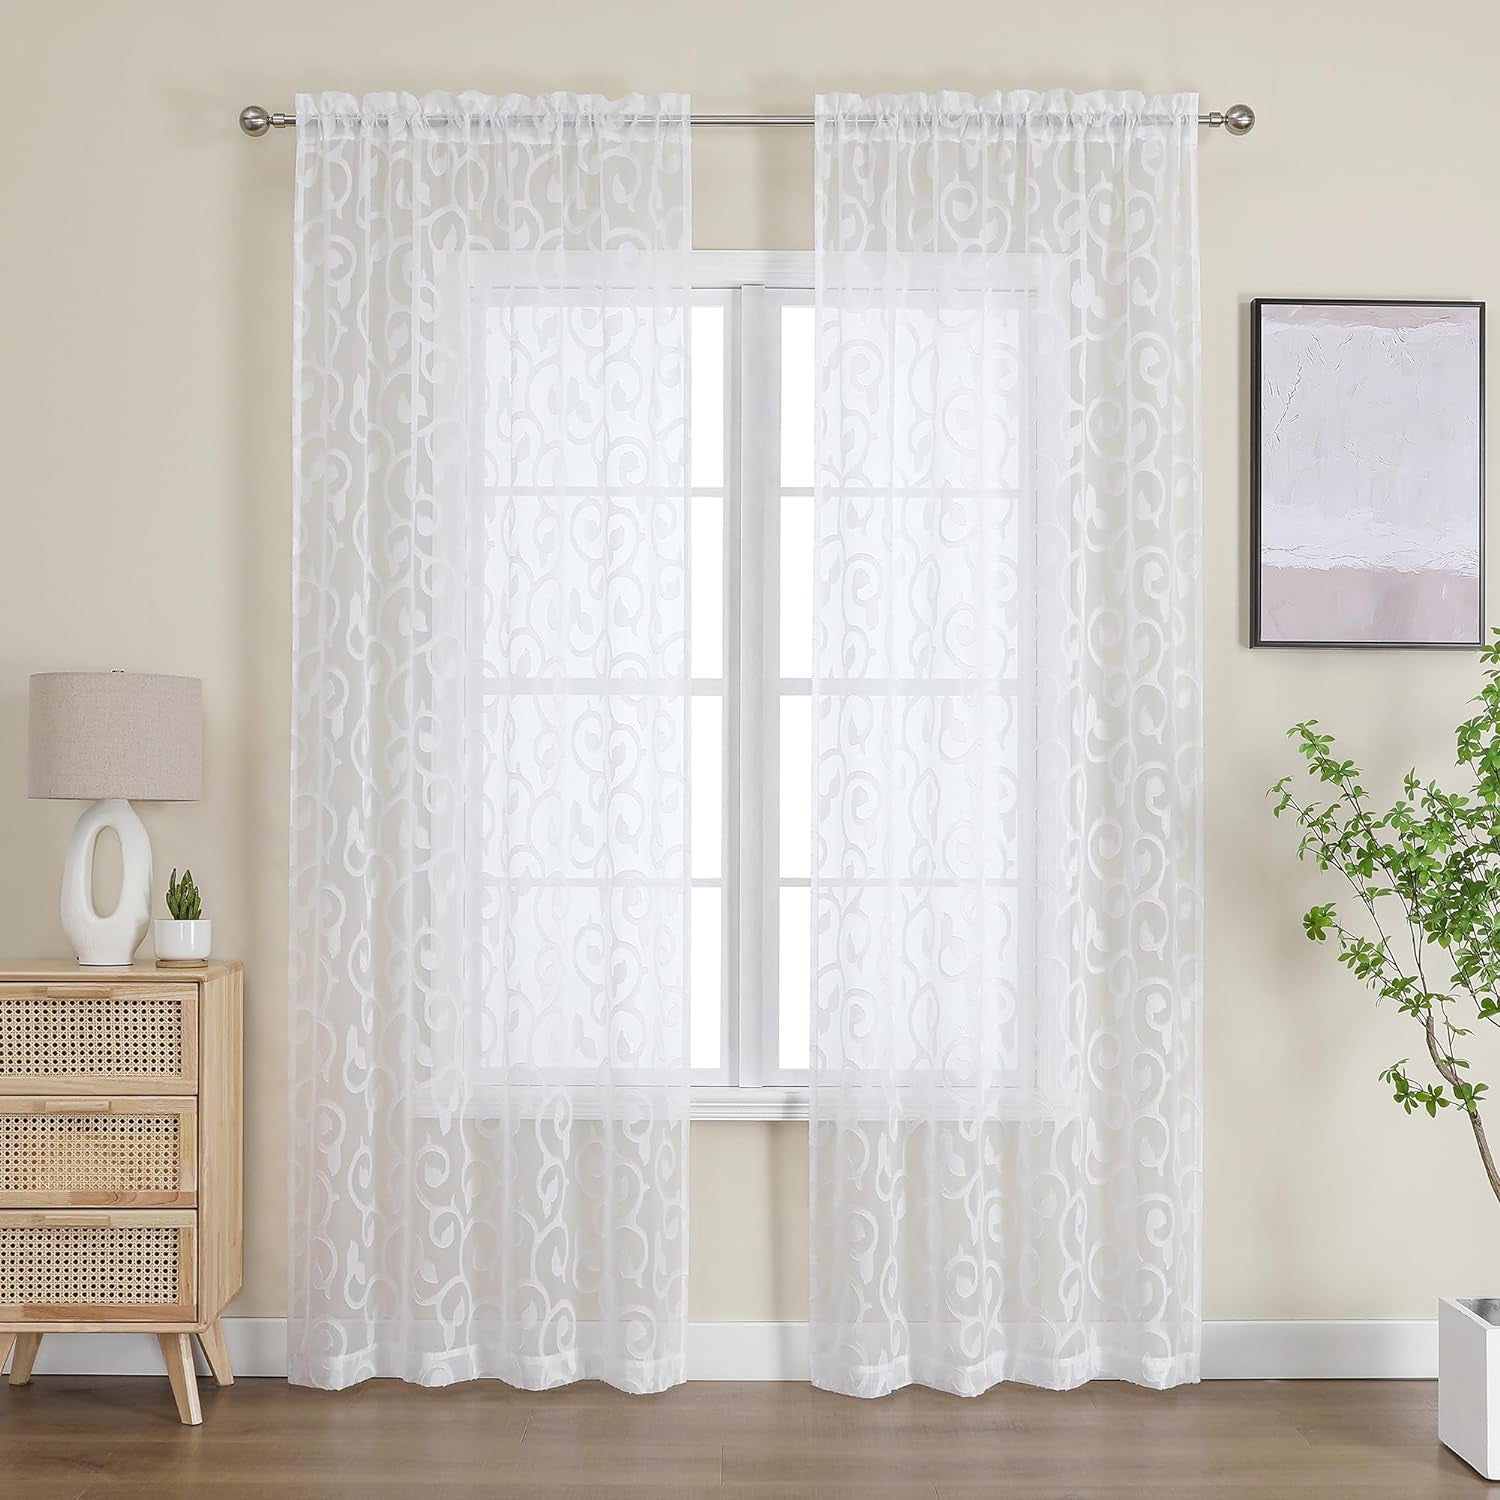 OWENIE Furman Sheer White Curtains 84 Inches Long for Bedroom Living Room 2 Panels Set, White Curtains Jacquard Clip Light Filtering Semi Sheer Curtain Transparent Rod Pocket Window Drapes, 2 Pcs  OWENIE   